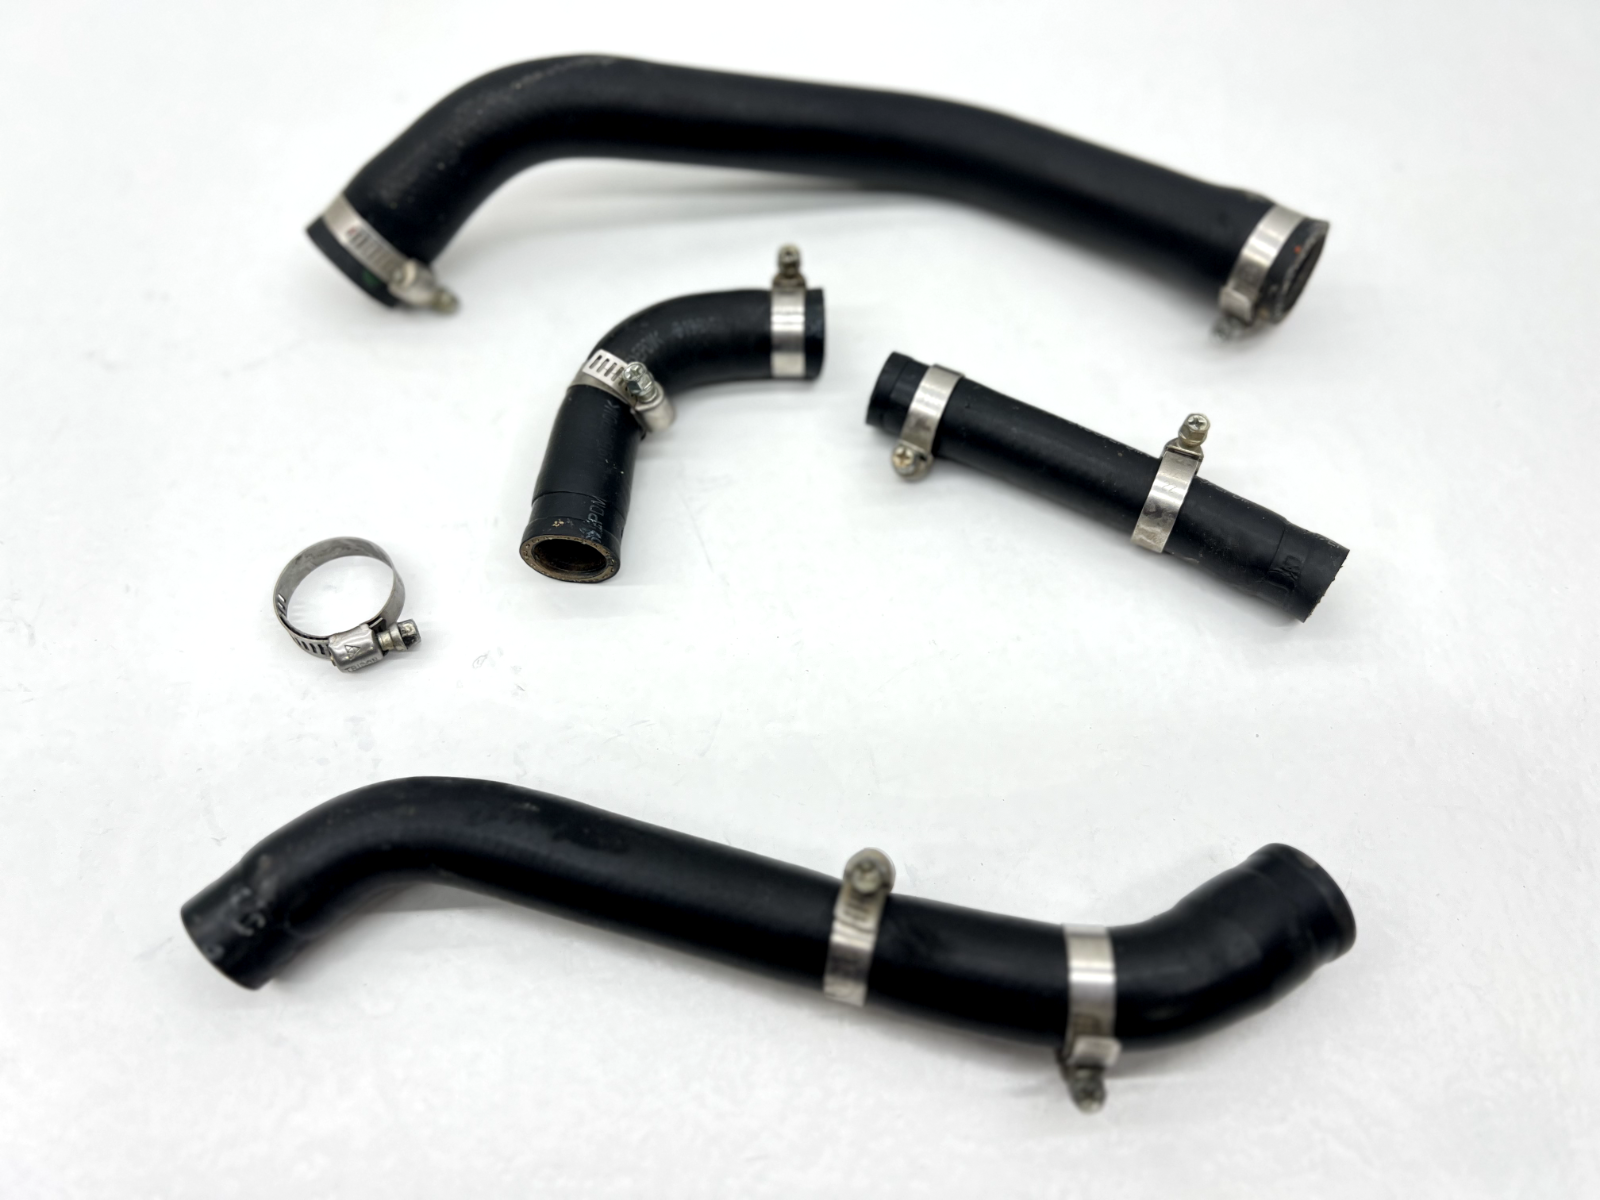 2020 Yamaha YZ450F Radiator Hoses Motor Cooler Cooling Water Hoses Clamps Black